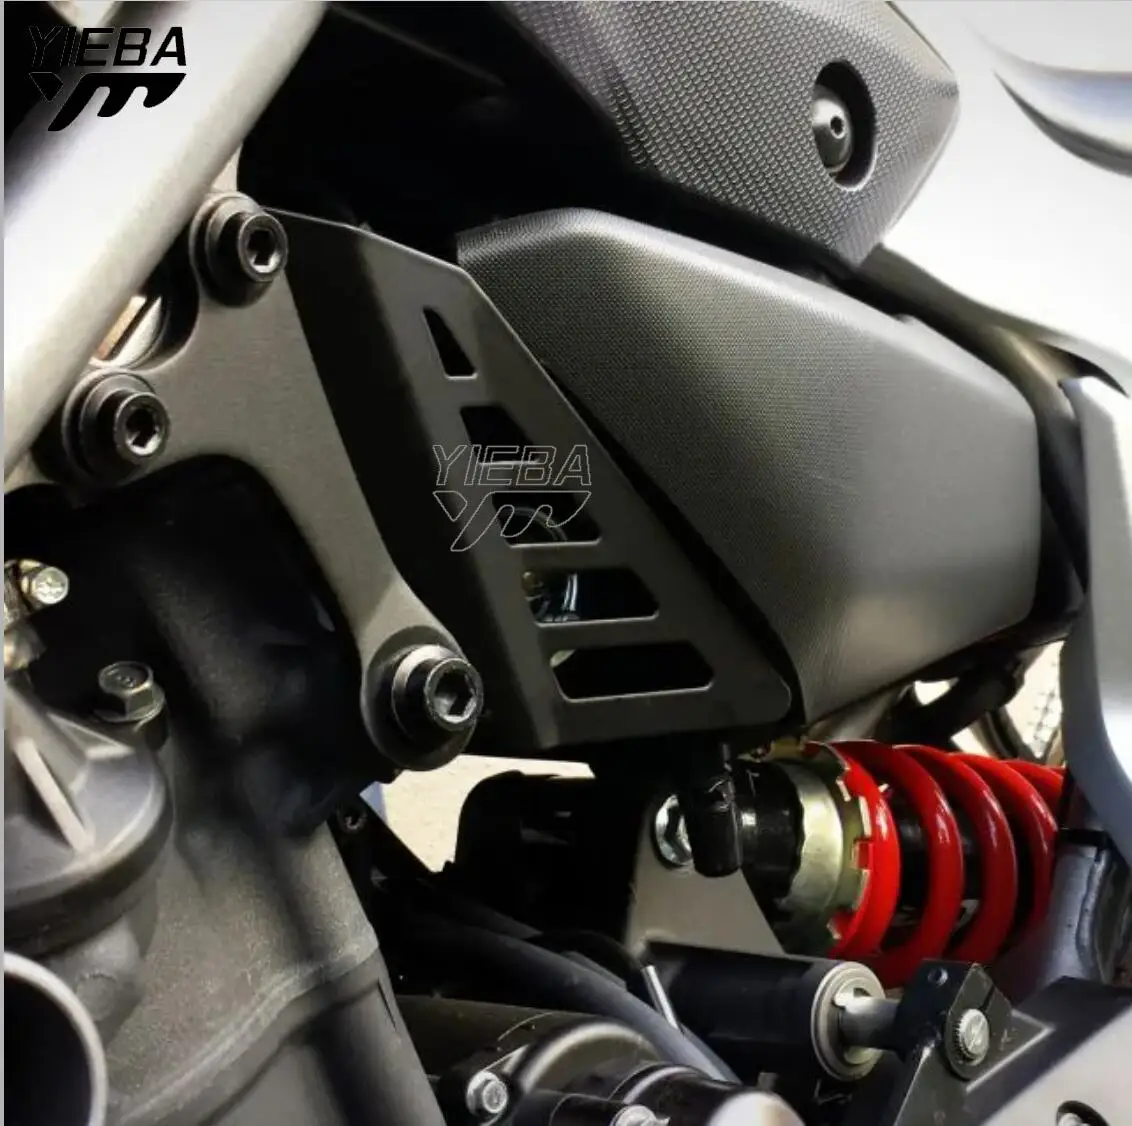 

With Logo MT07 ACCELERATOR CONTROL COVER For YAMAHA MT-07 Moto Cage Tracer FZ07 FZ-07 TRACER 700 7 GT 2013 2014 2015 2016 - 2021